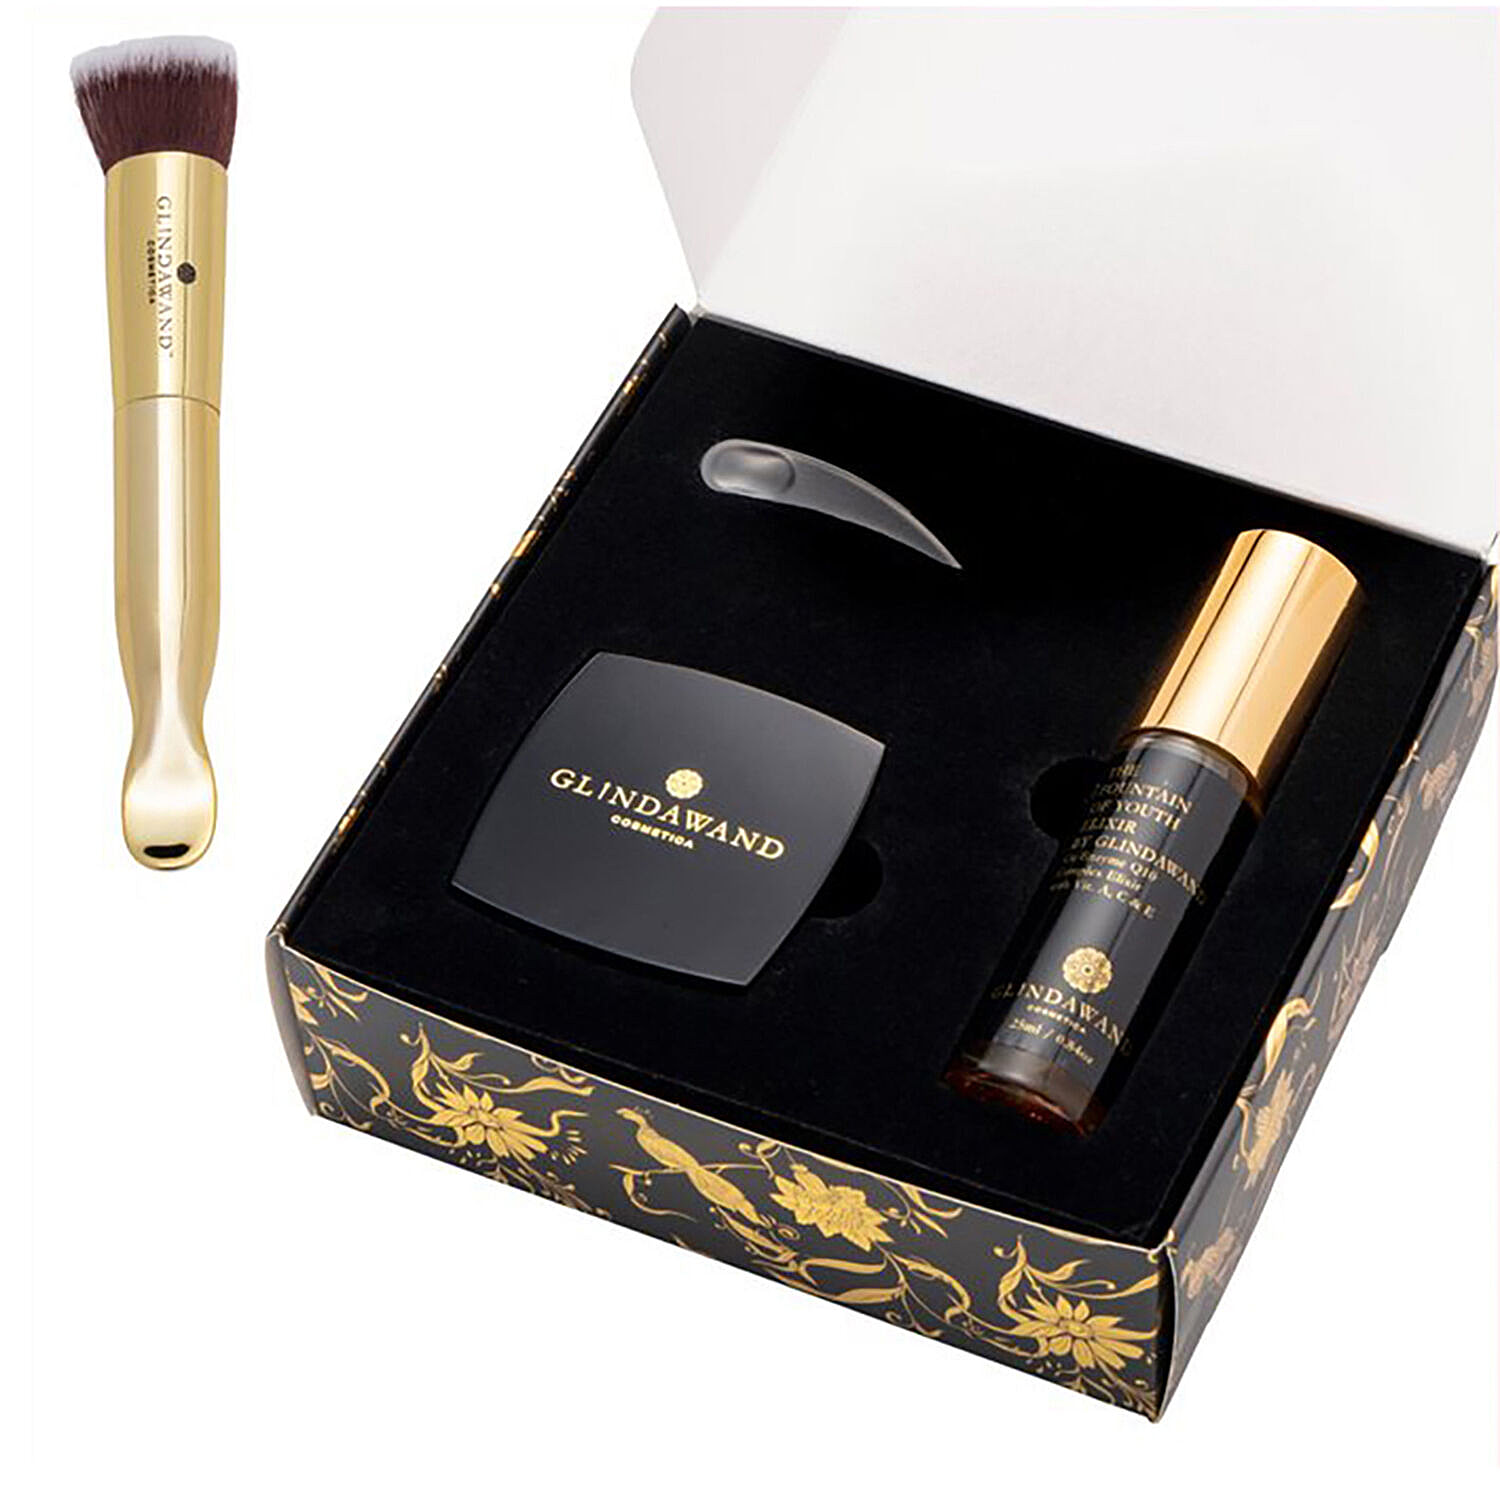 Glindawand - Duo Gift Box (Incl. Fountain of Youth Elixir - 25ml & Divinity Foundation) - French Beige (With Free Fibre Brush with Spoon)